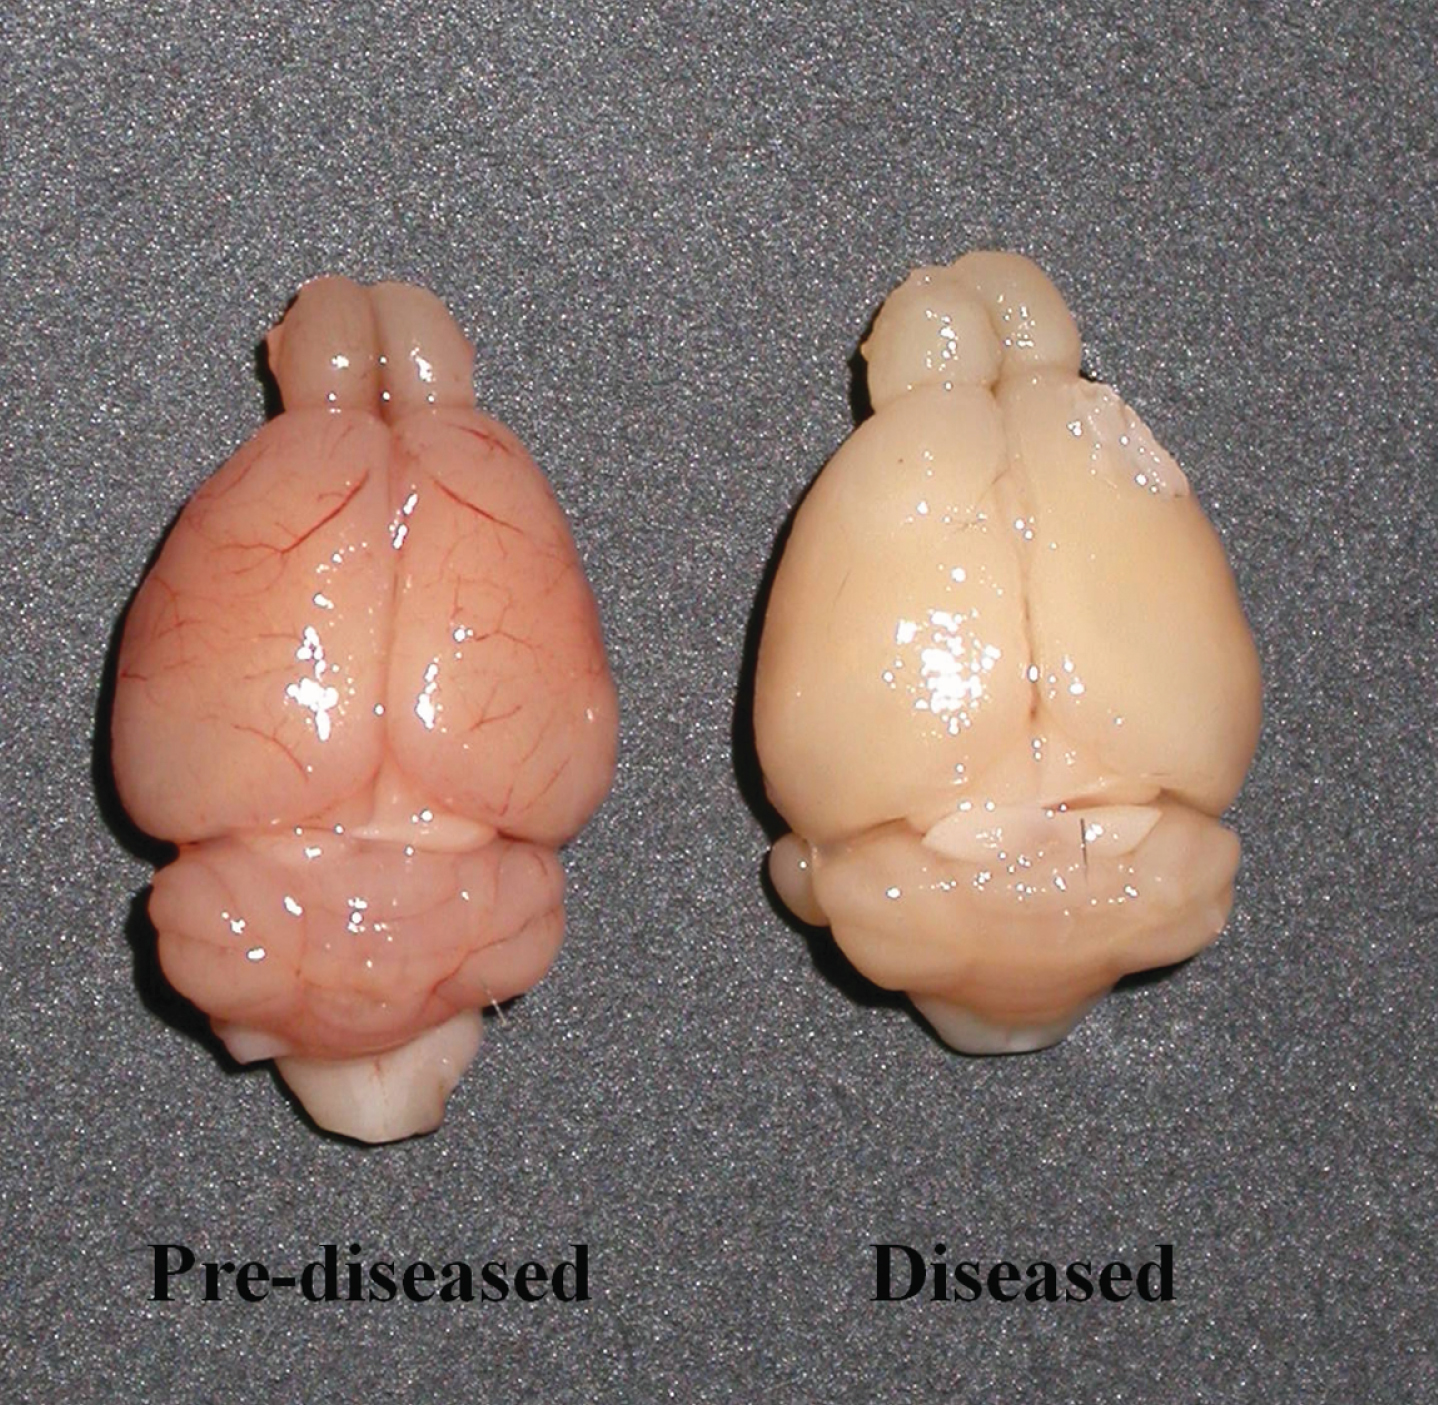 Unfixed and non-perfused brains of the pre-diseased mice and the diseased mice. Photograph showing the brains of the pre-diseased mice (left) and the diseased mice (right).